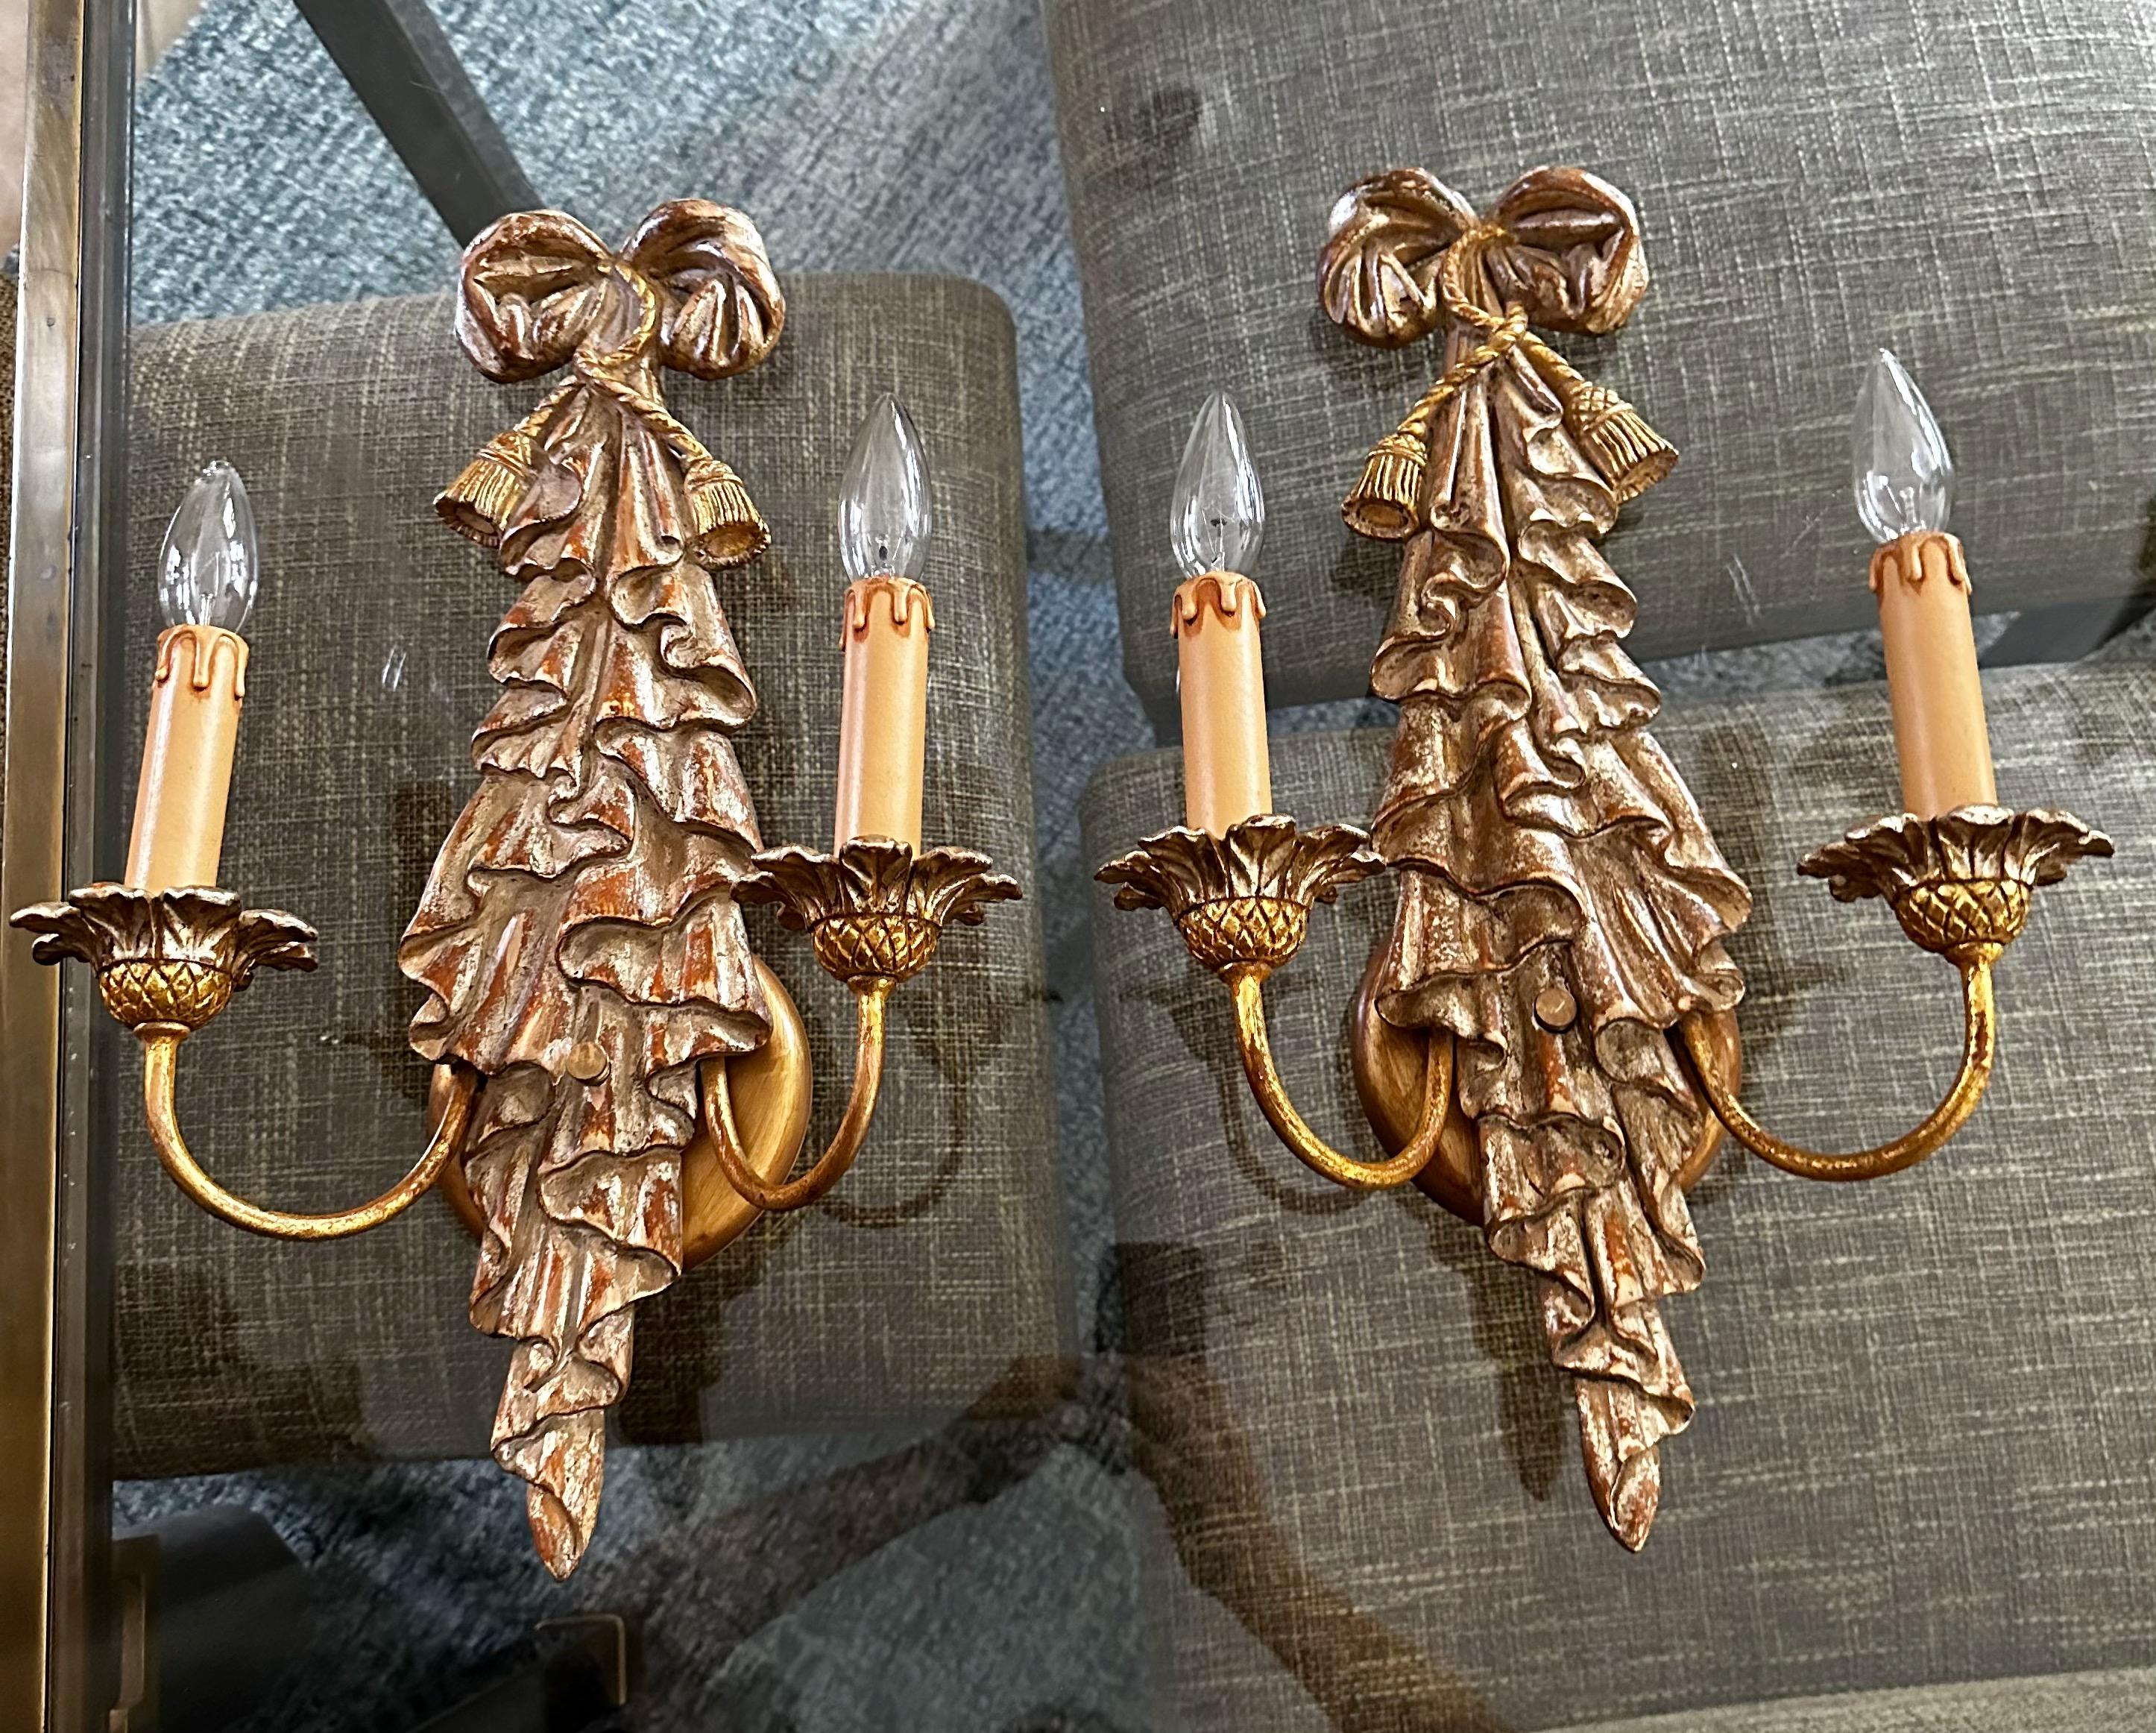 Pair of neoclassic style carved giltwood two-arm wall sconces with gold and silver highlights. The design of the sconces includes ribbon a draped motif. Each sconce uses two candelabra 